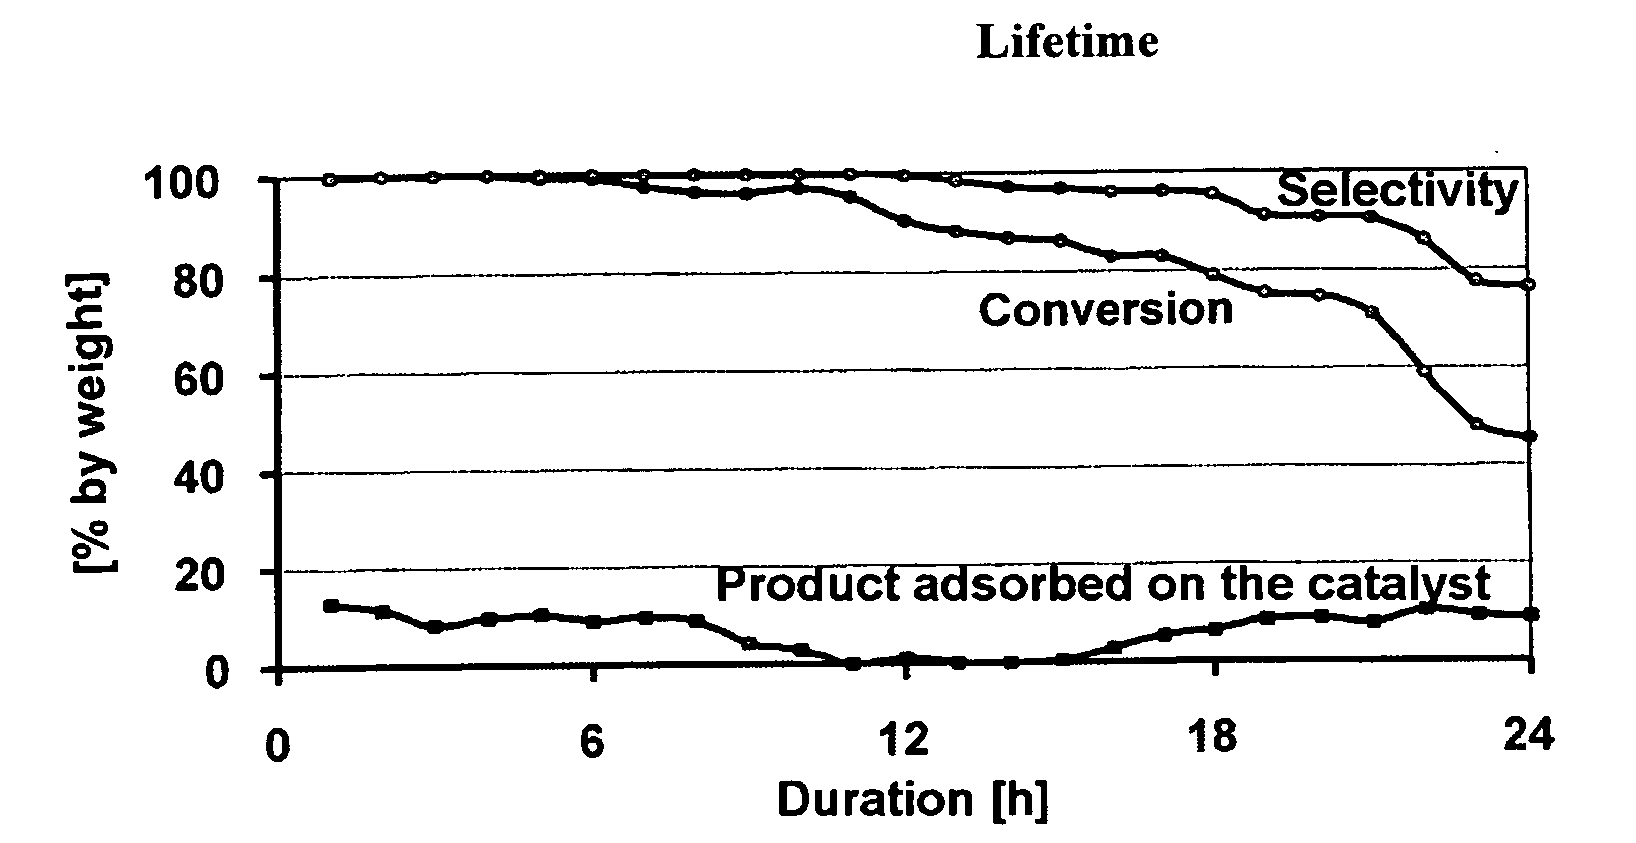 Process for the synthesis of lauryllactam (L12) by gas phase catalytic rearrangement of cyclododecanone oxime